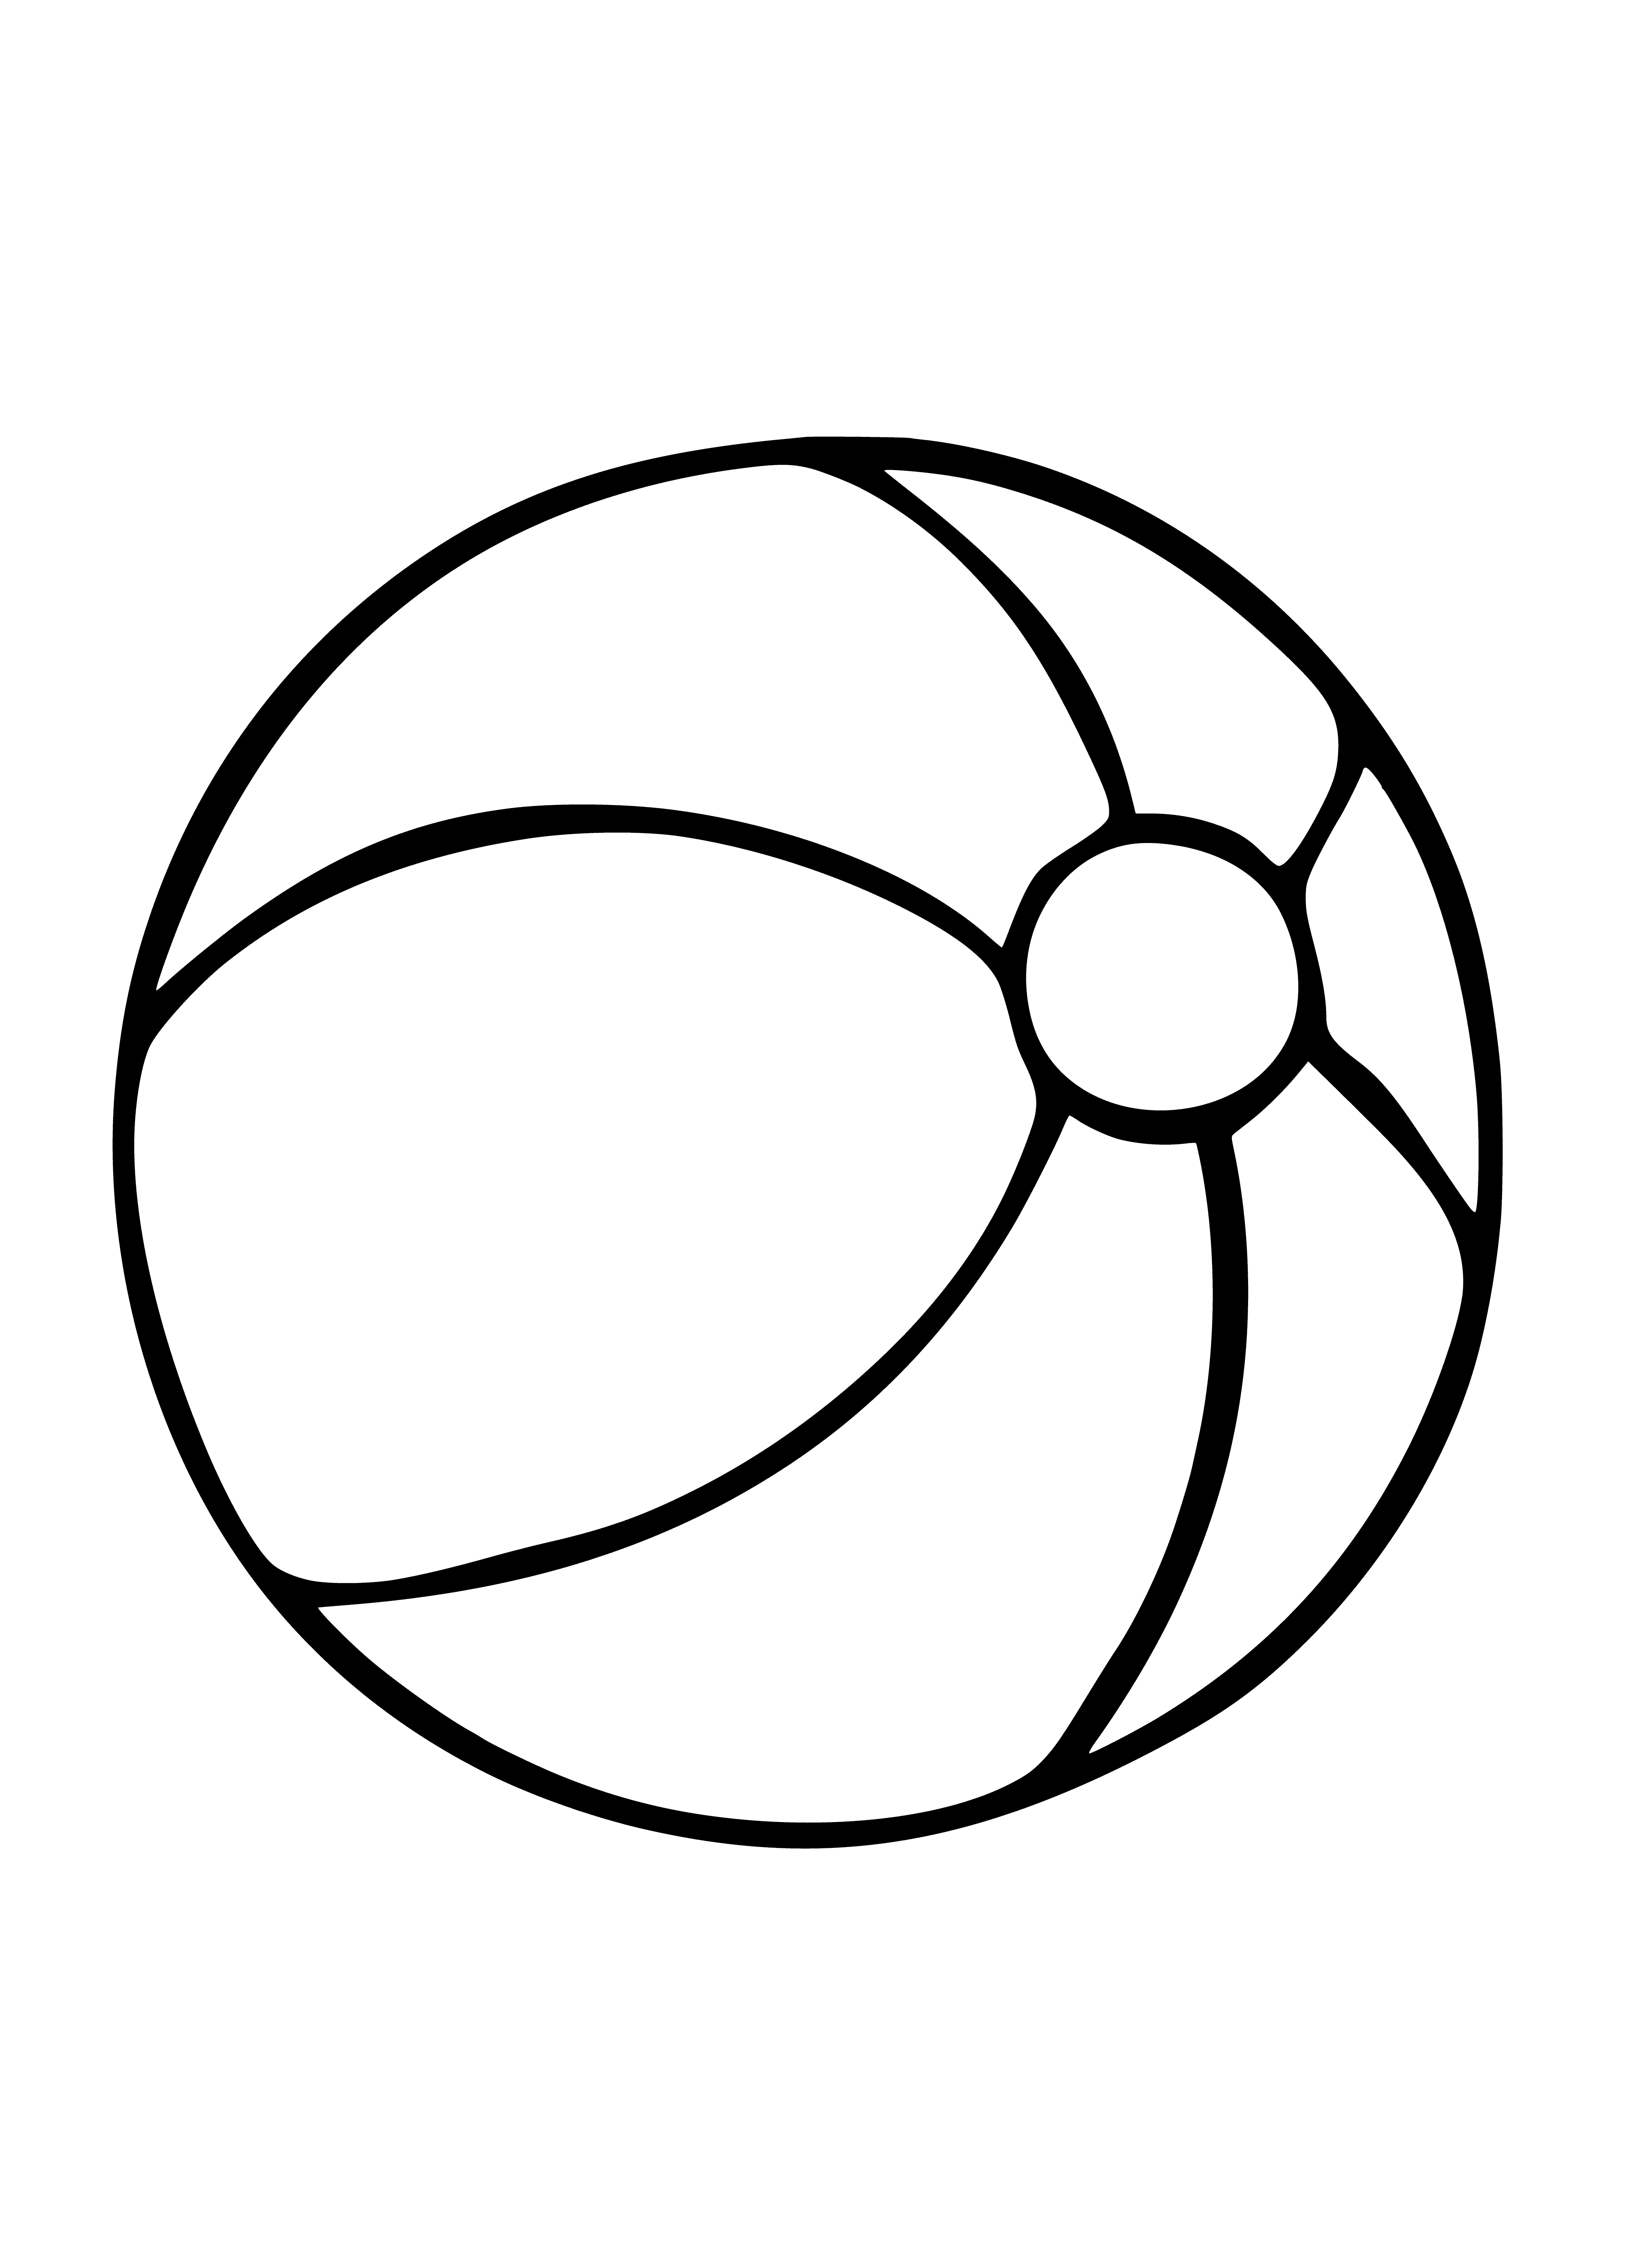 coloring page: 3 coloring pages: ball in center w/ patterns or several balls of diff. sizes, or 1 big w/ sm. around.